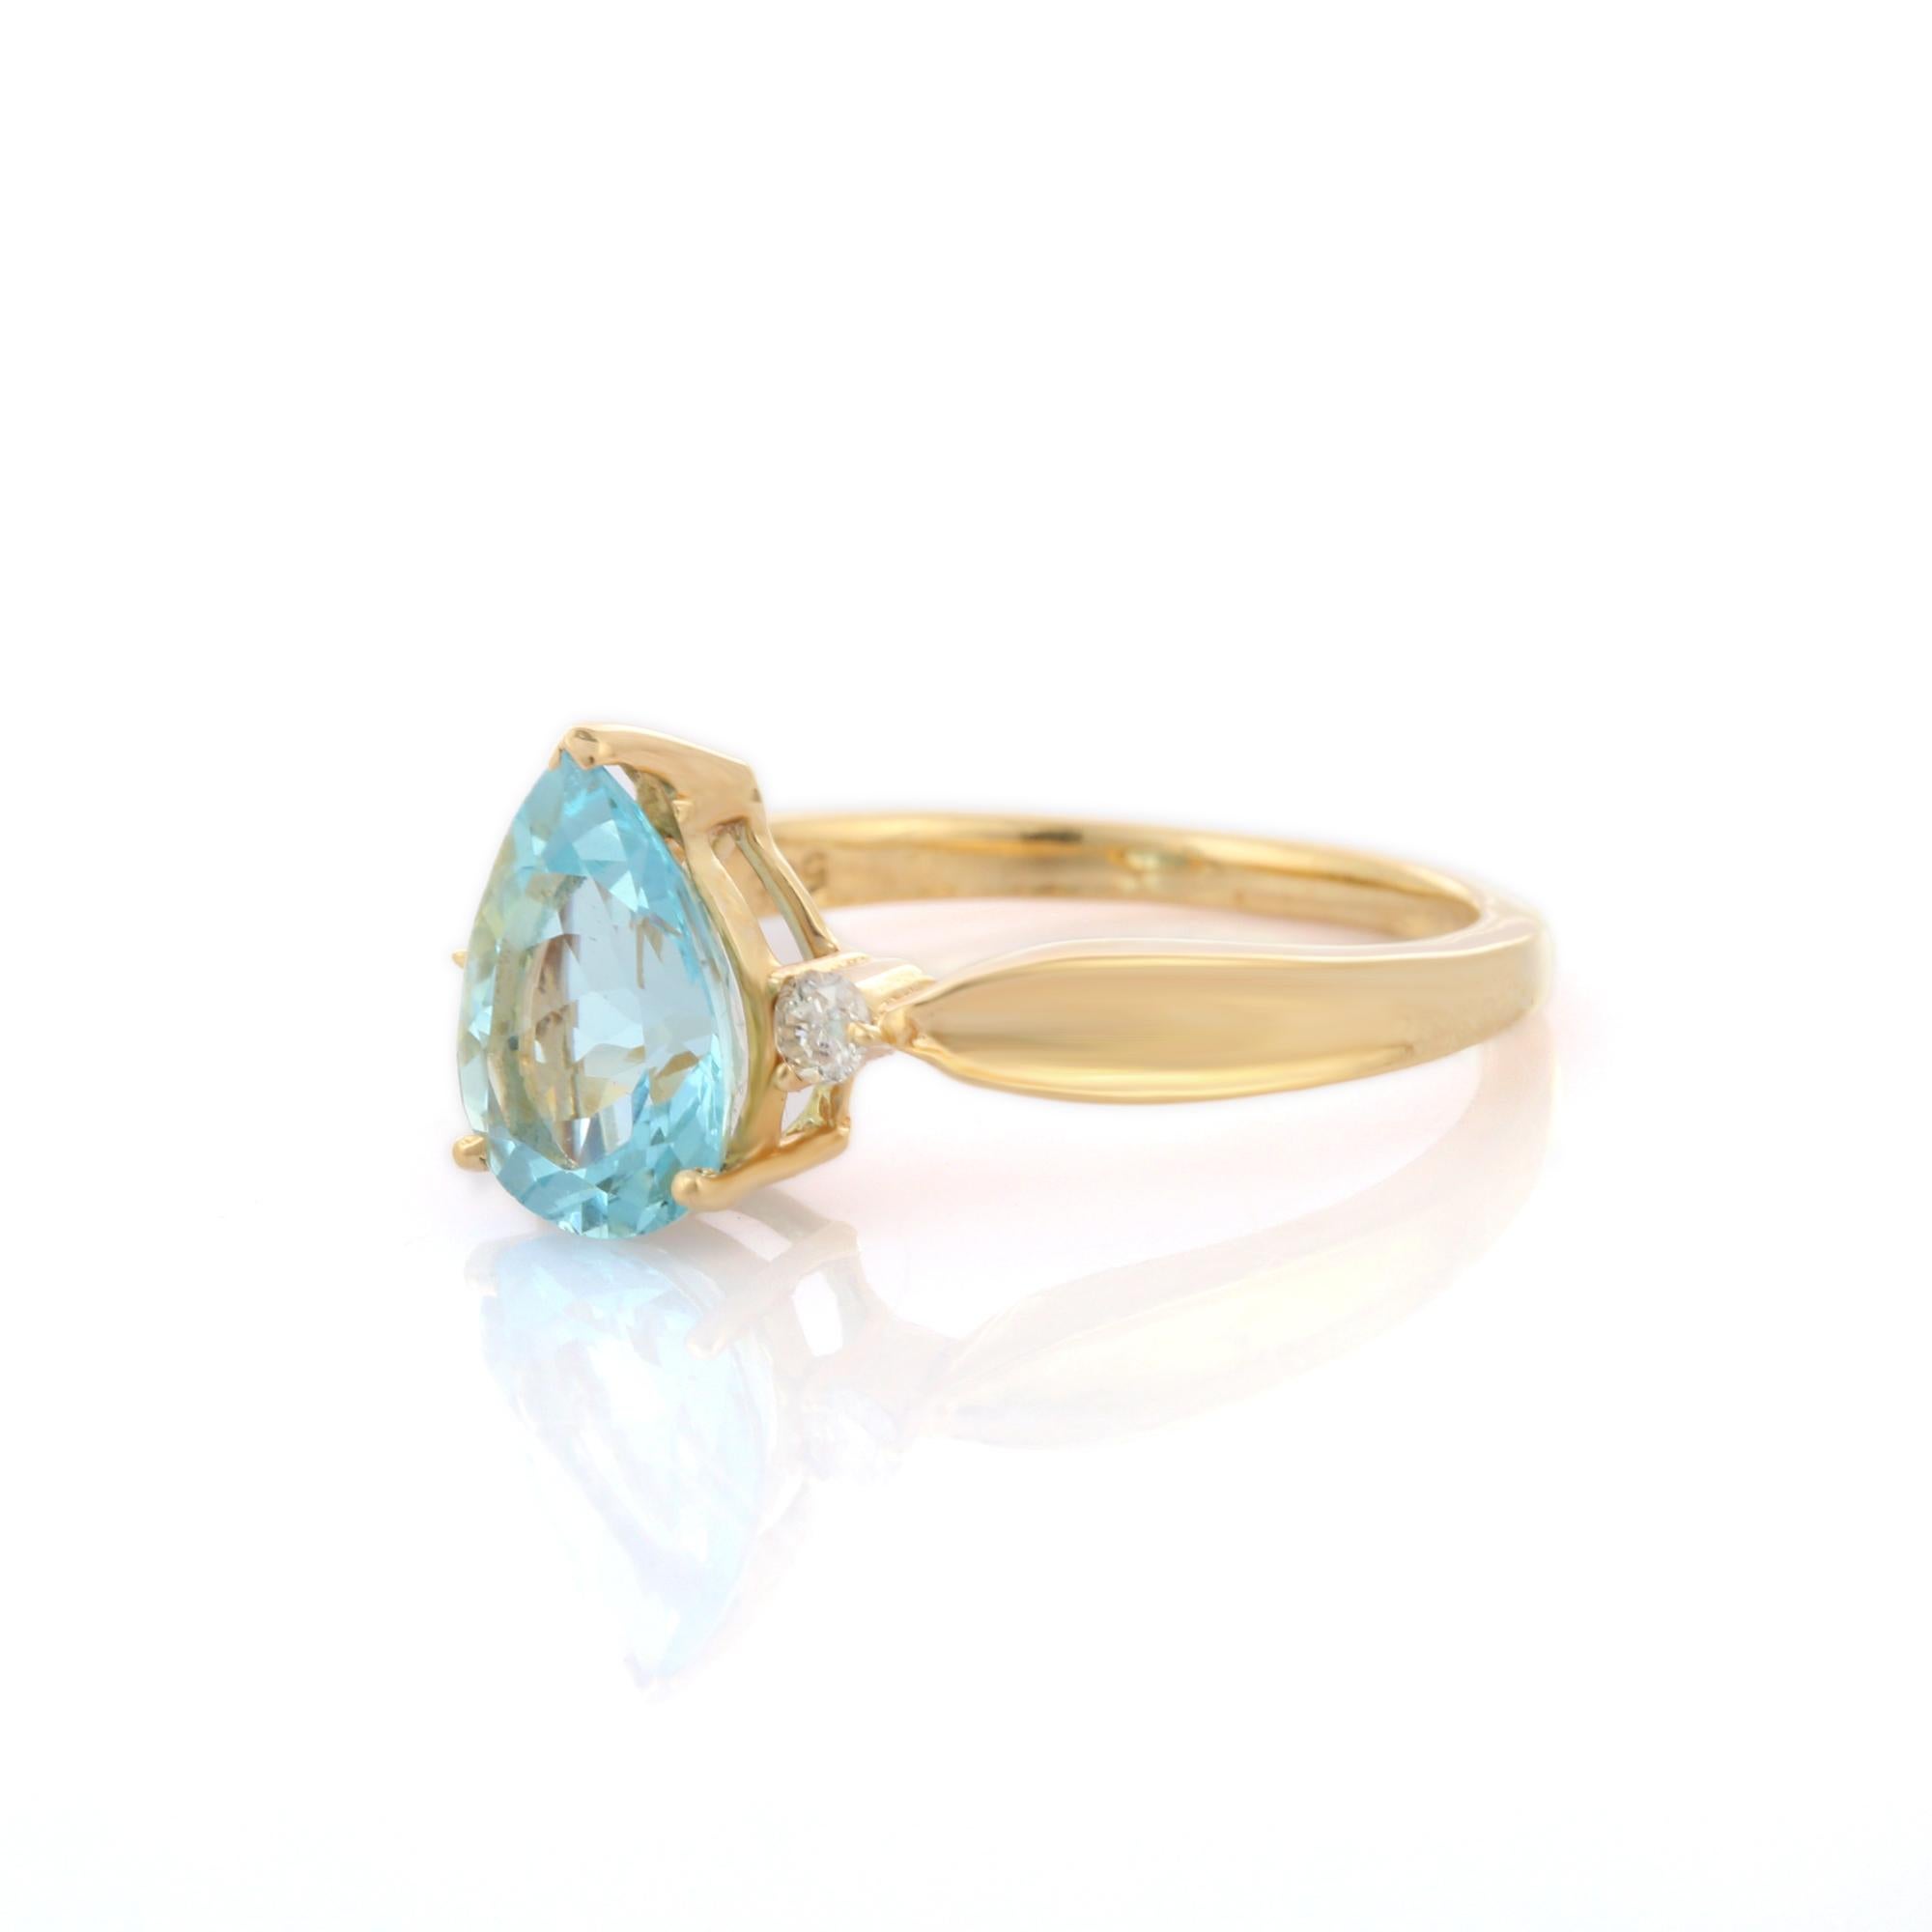 For Sale:  Pear Cut Aquamarine and Diamond Three Stone Engagement Ring in 14K Yellow Gold  3